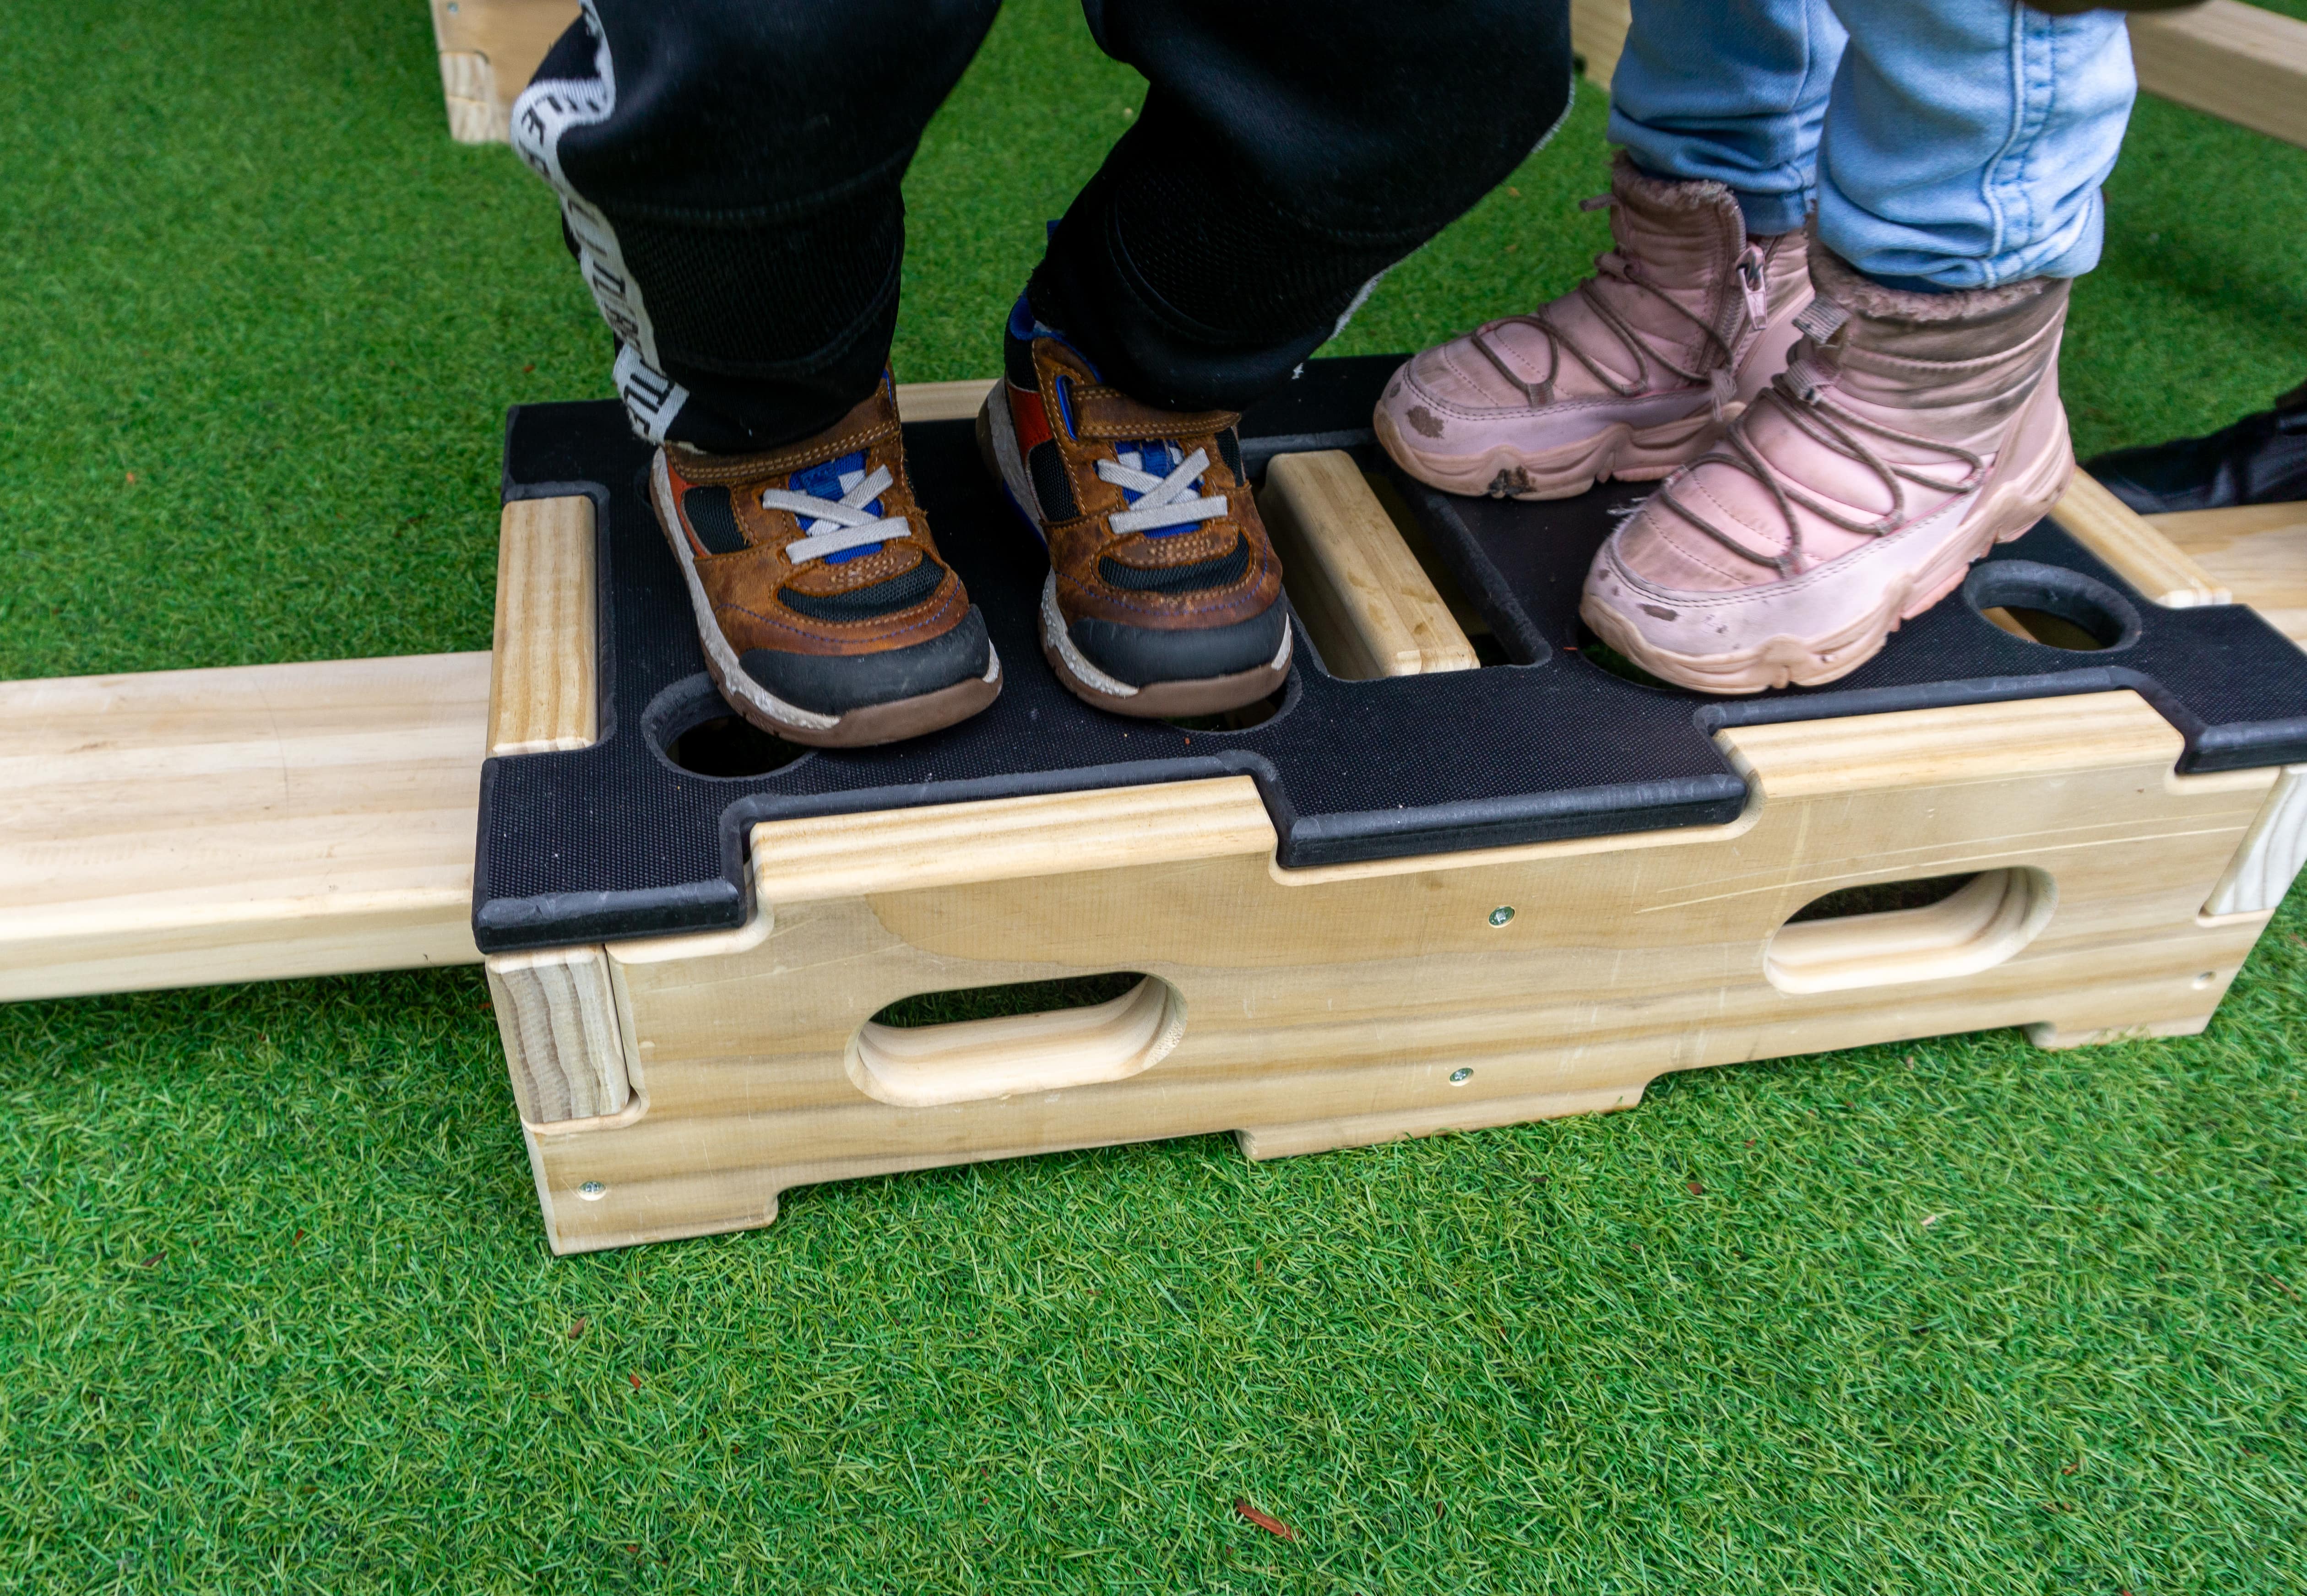 Two children are stood on top of a wooden Play Builder block, which has been placed on artificial grass.